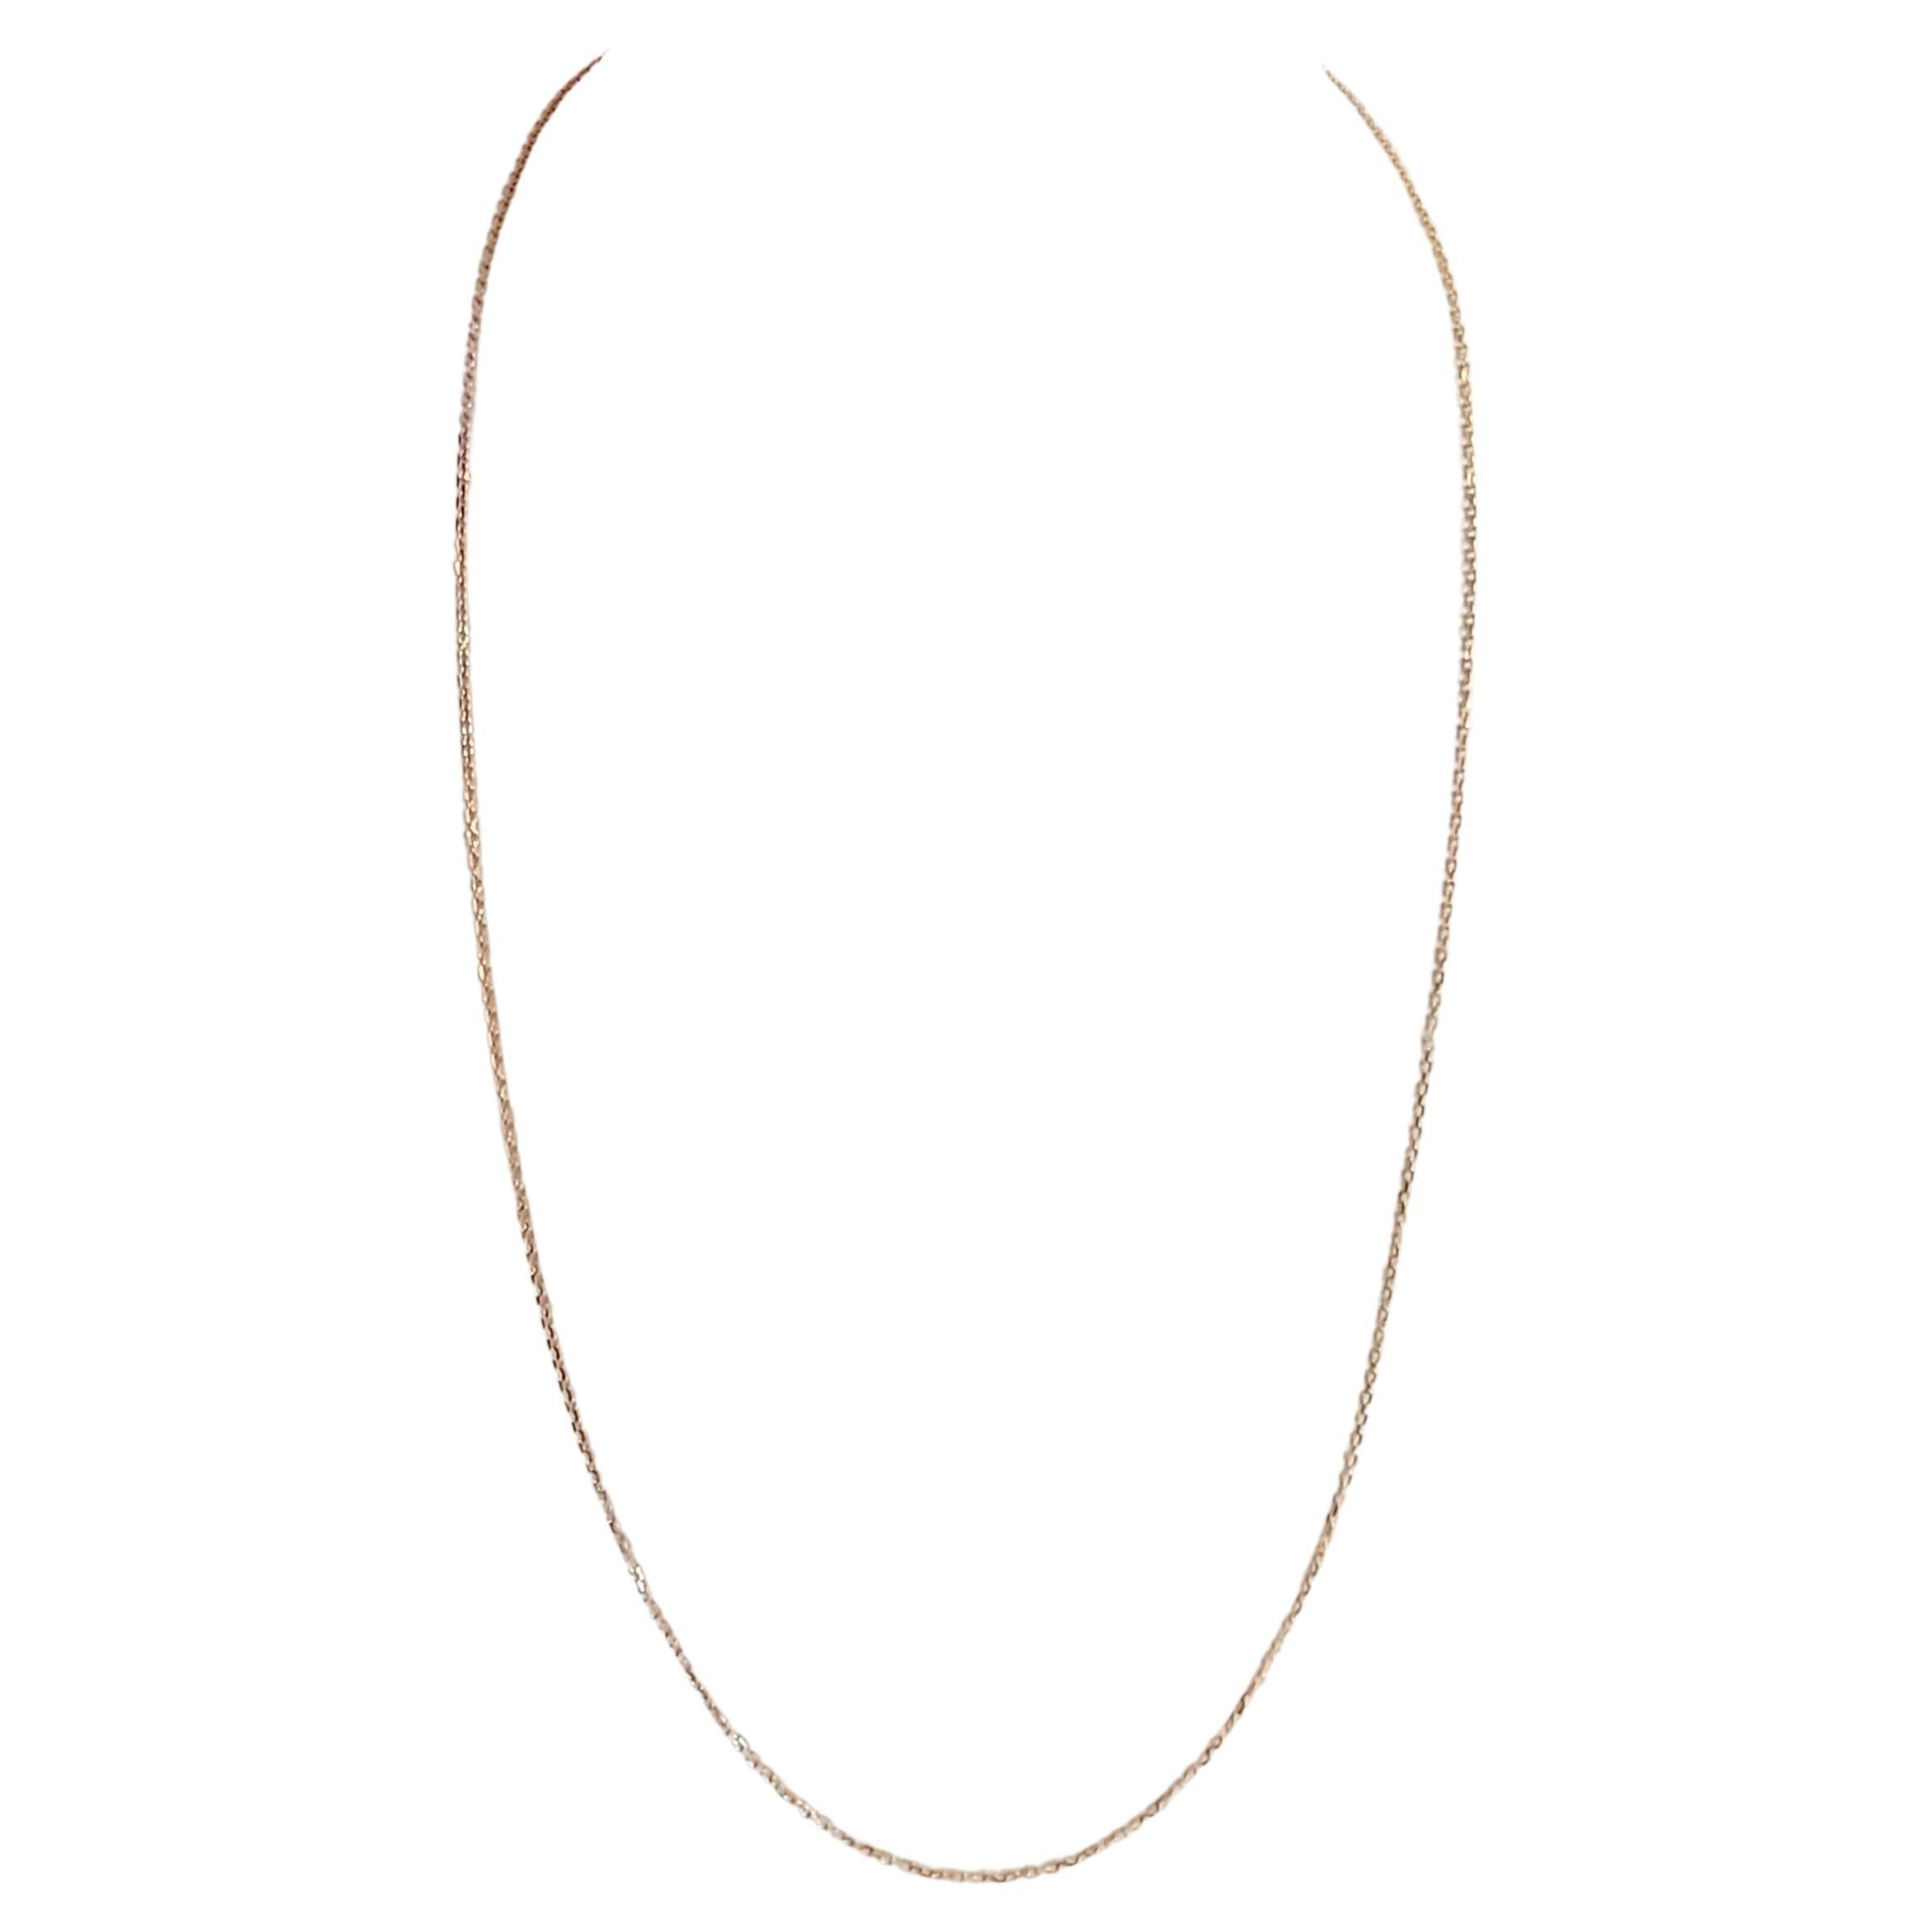 Tiffany & Co. 18K Rose Gold Chain 18" For Sale